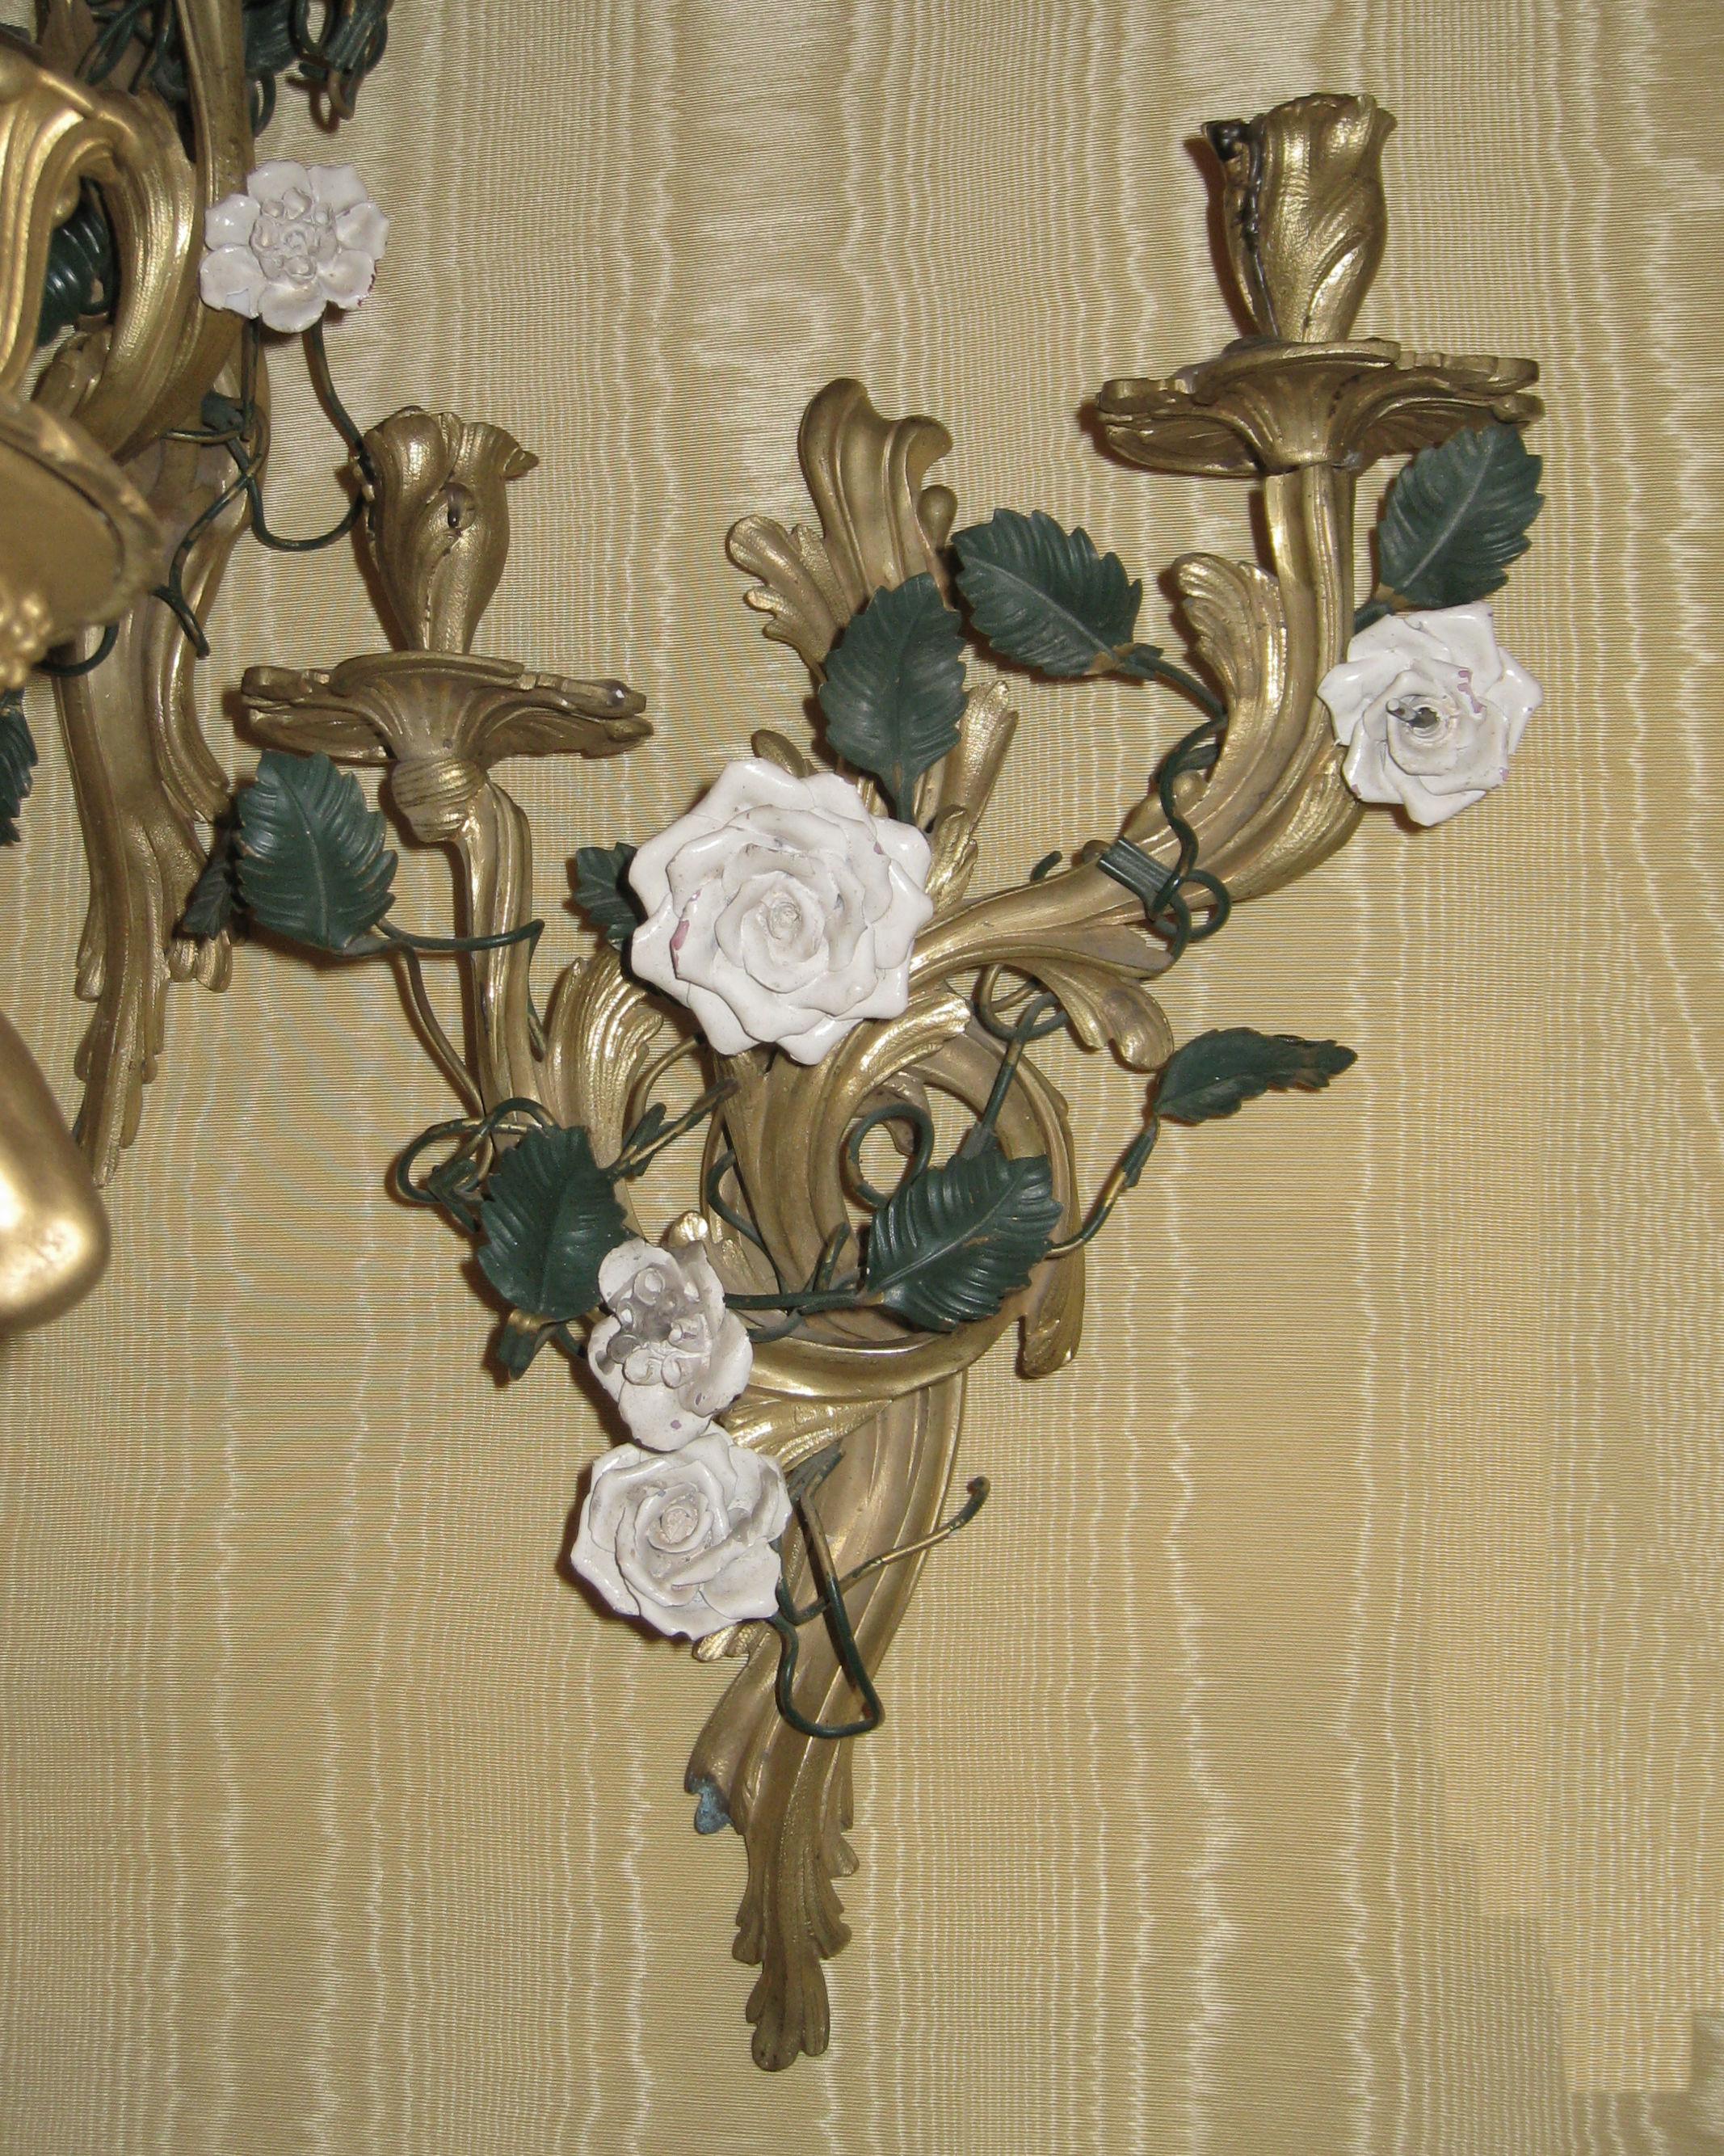 Pair of Louis XV Style Gilt Bronze Sconces with Porcelain Flowers
Stock Number: L122